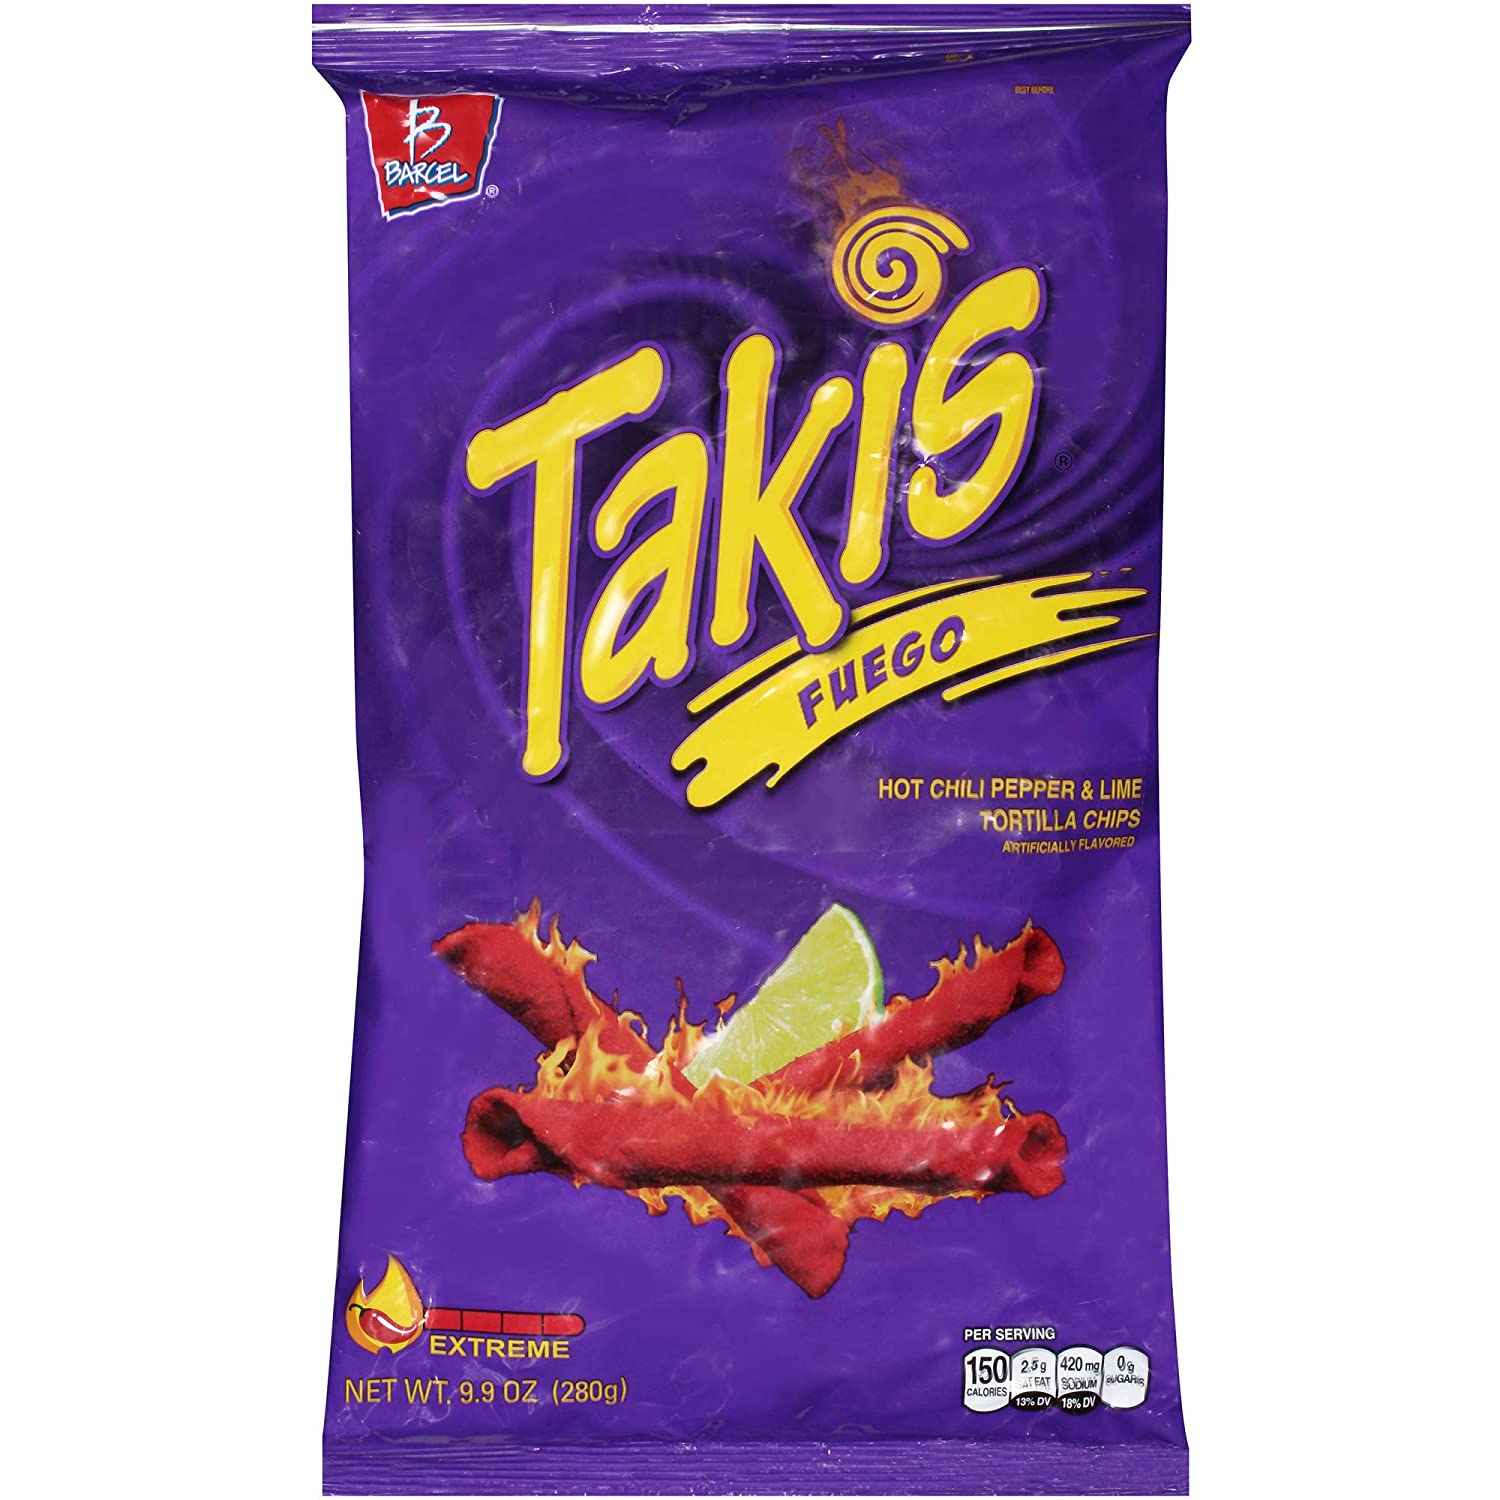 Takis Fuego Hot Chili Pepper & Lime Tortilla Chips, 9.9-Ounce Bag (1 Pack)